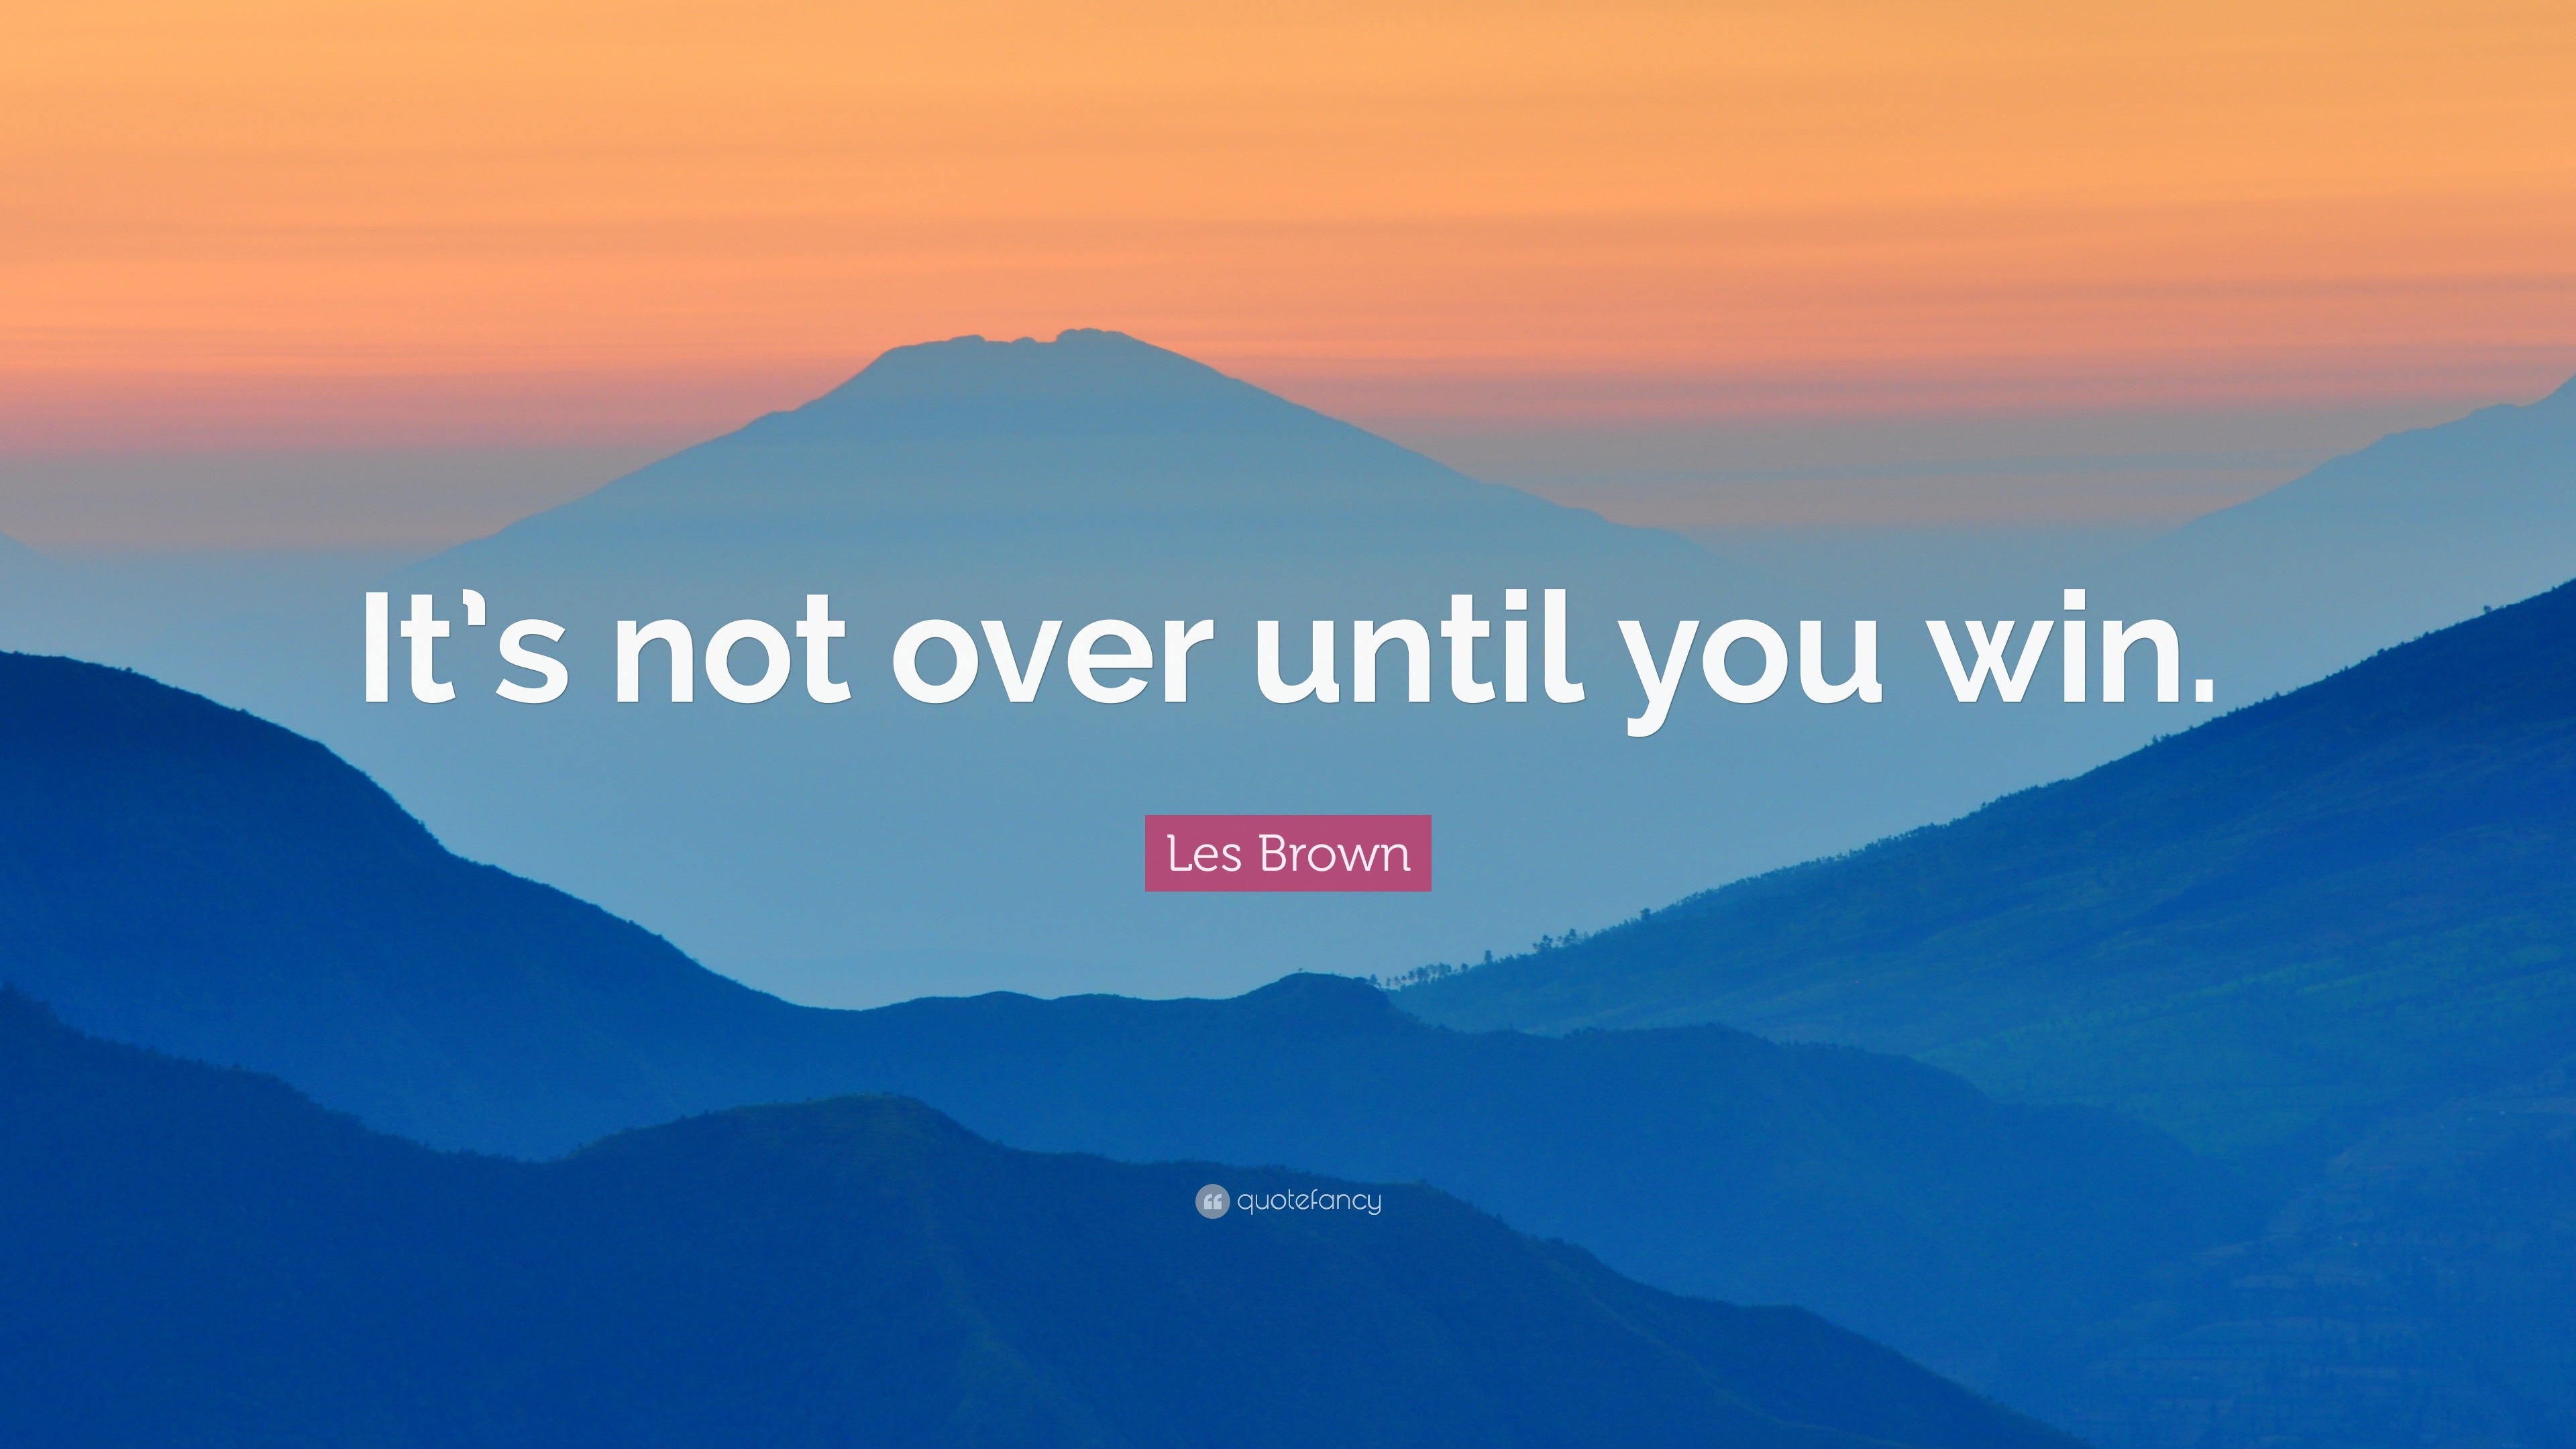 Les Brown Quote: “It’s not over until you win.” (31 wallpapers